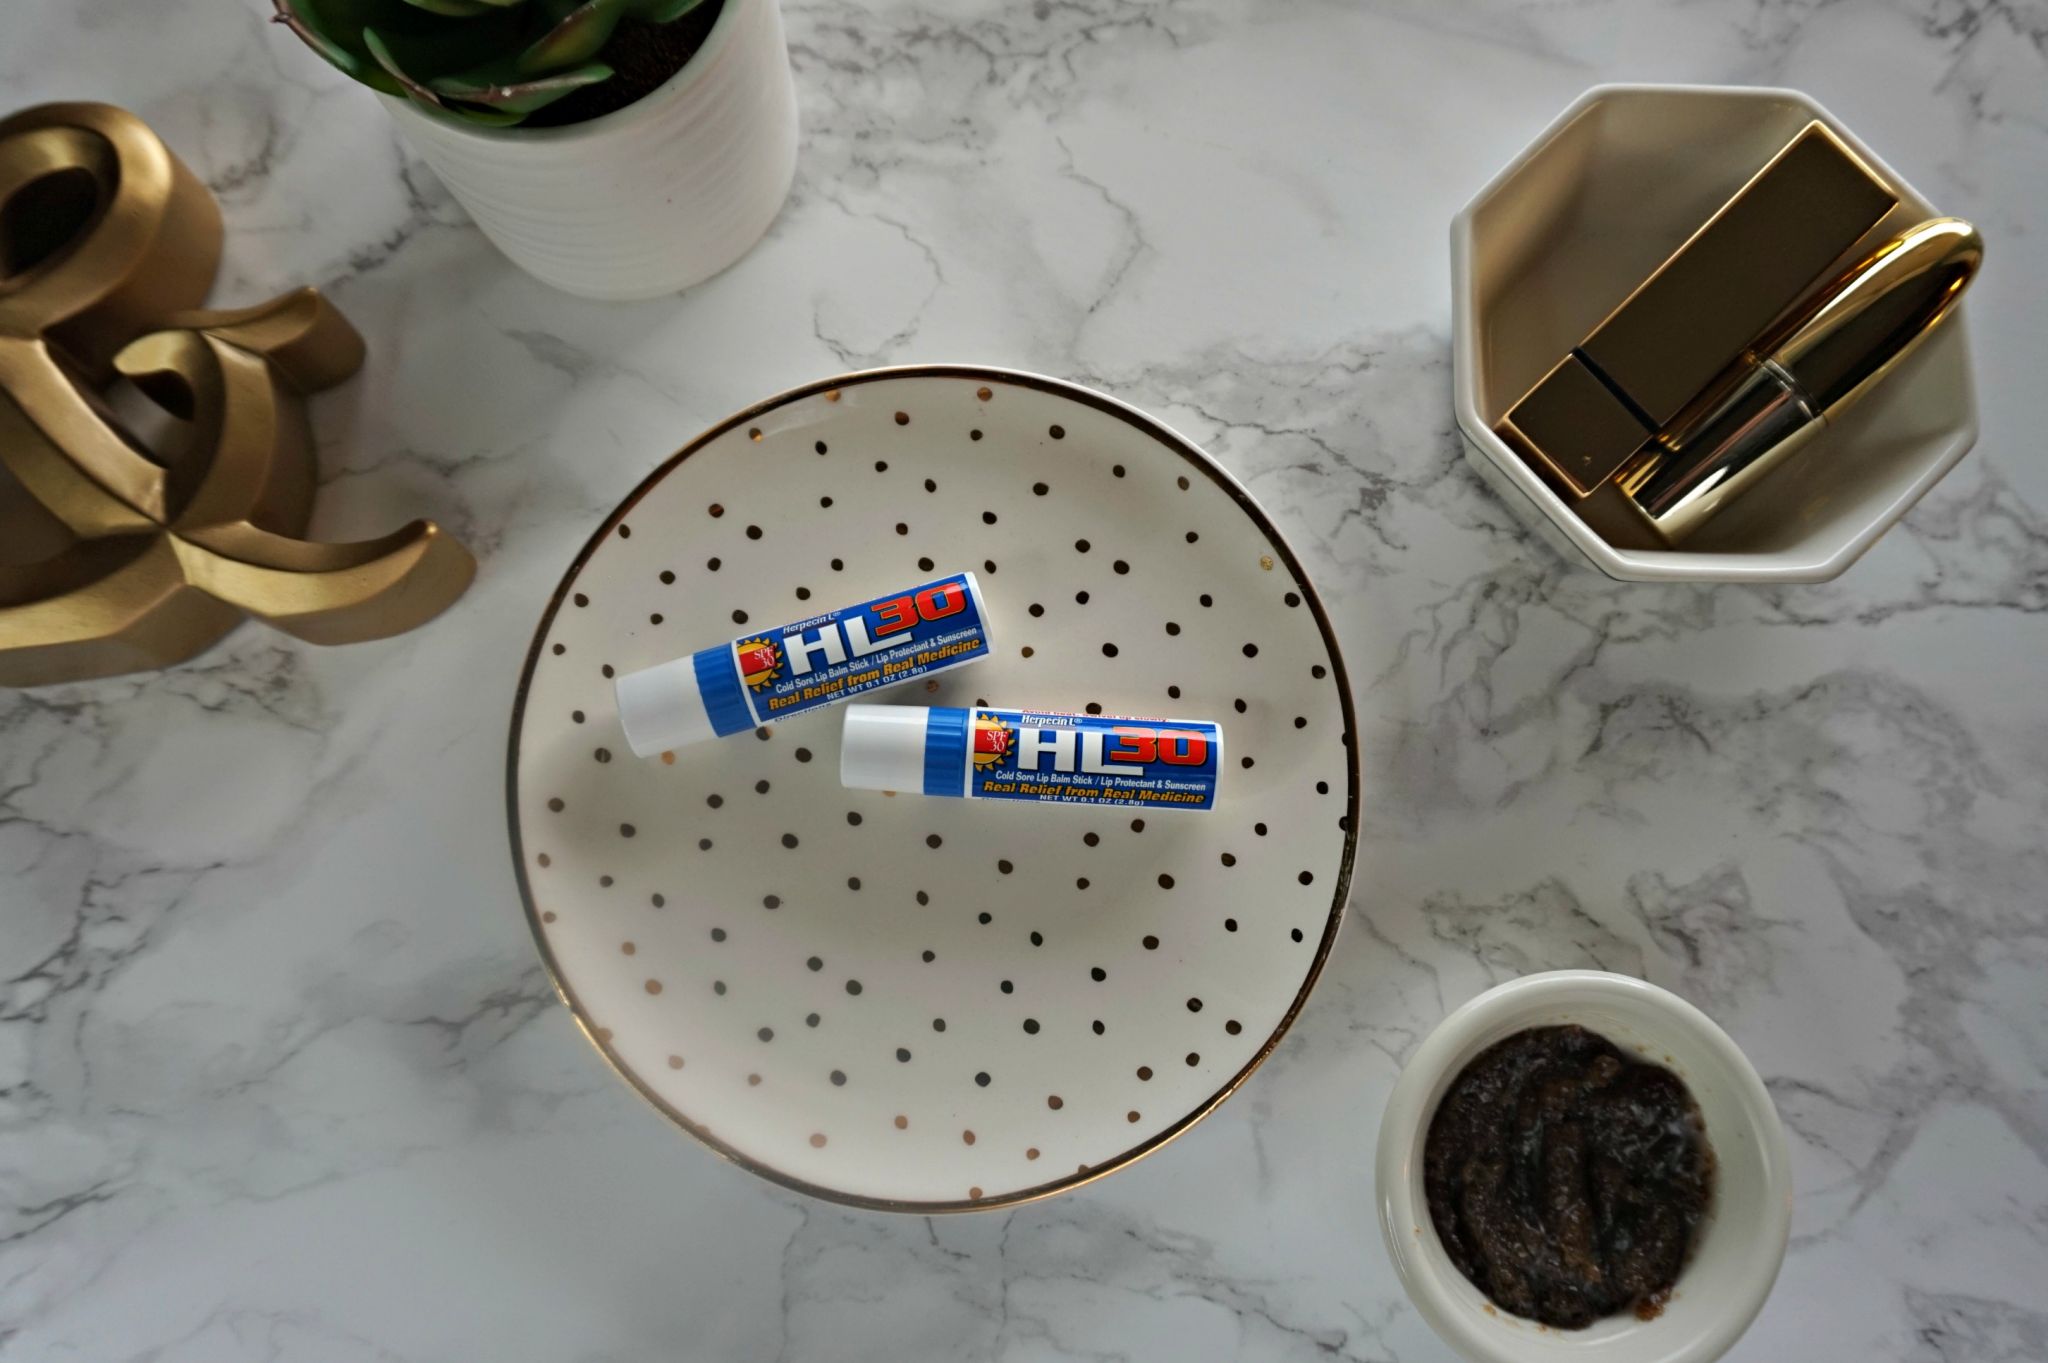 Chapped Lips Remedy With Herpecin + DIY Lip Scrub // Beauty With Lily #ad #Herpecin #PowerPrimer #BeautyJewel http://primp.in/LV19CLcP4p 